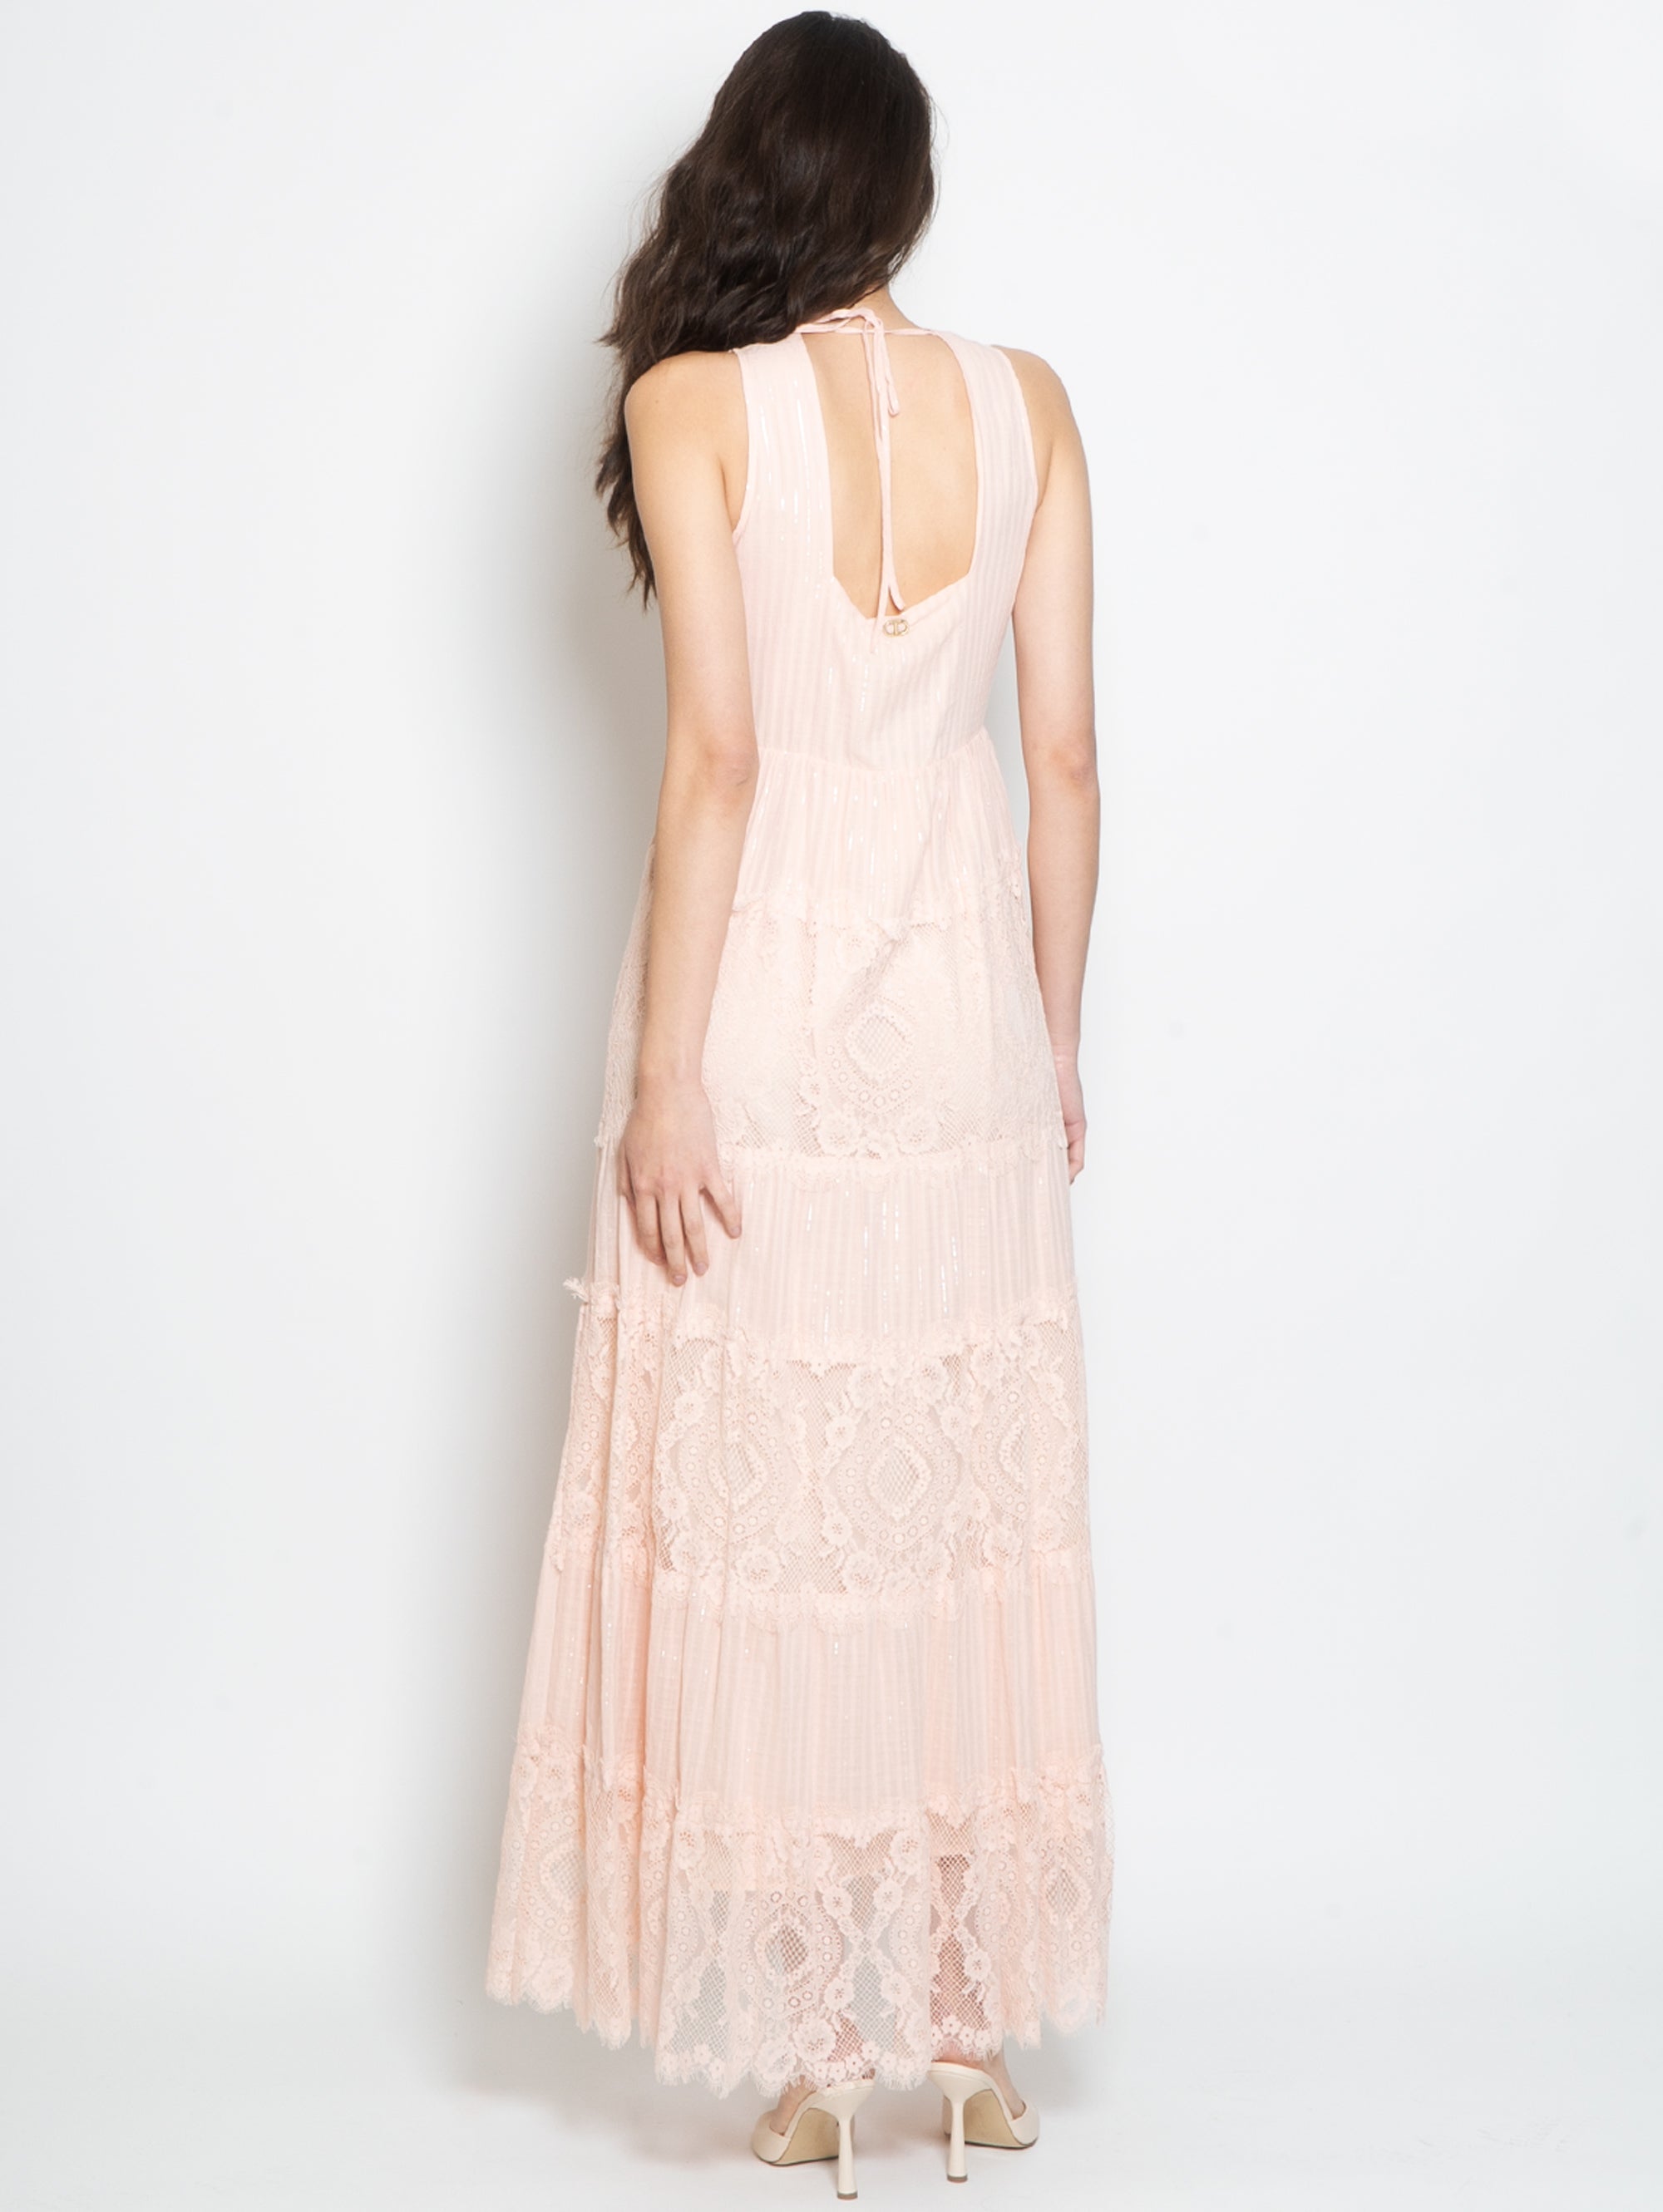 Muslin Dress with Pink Chantilly Lace